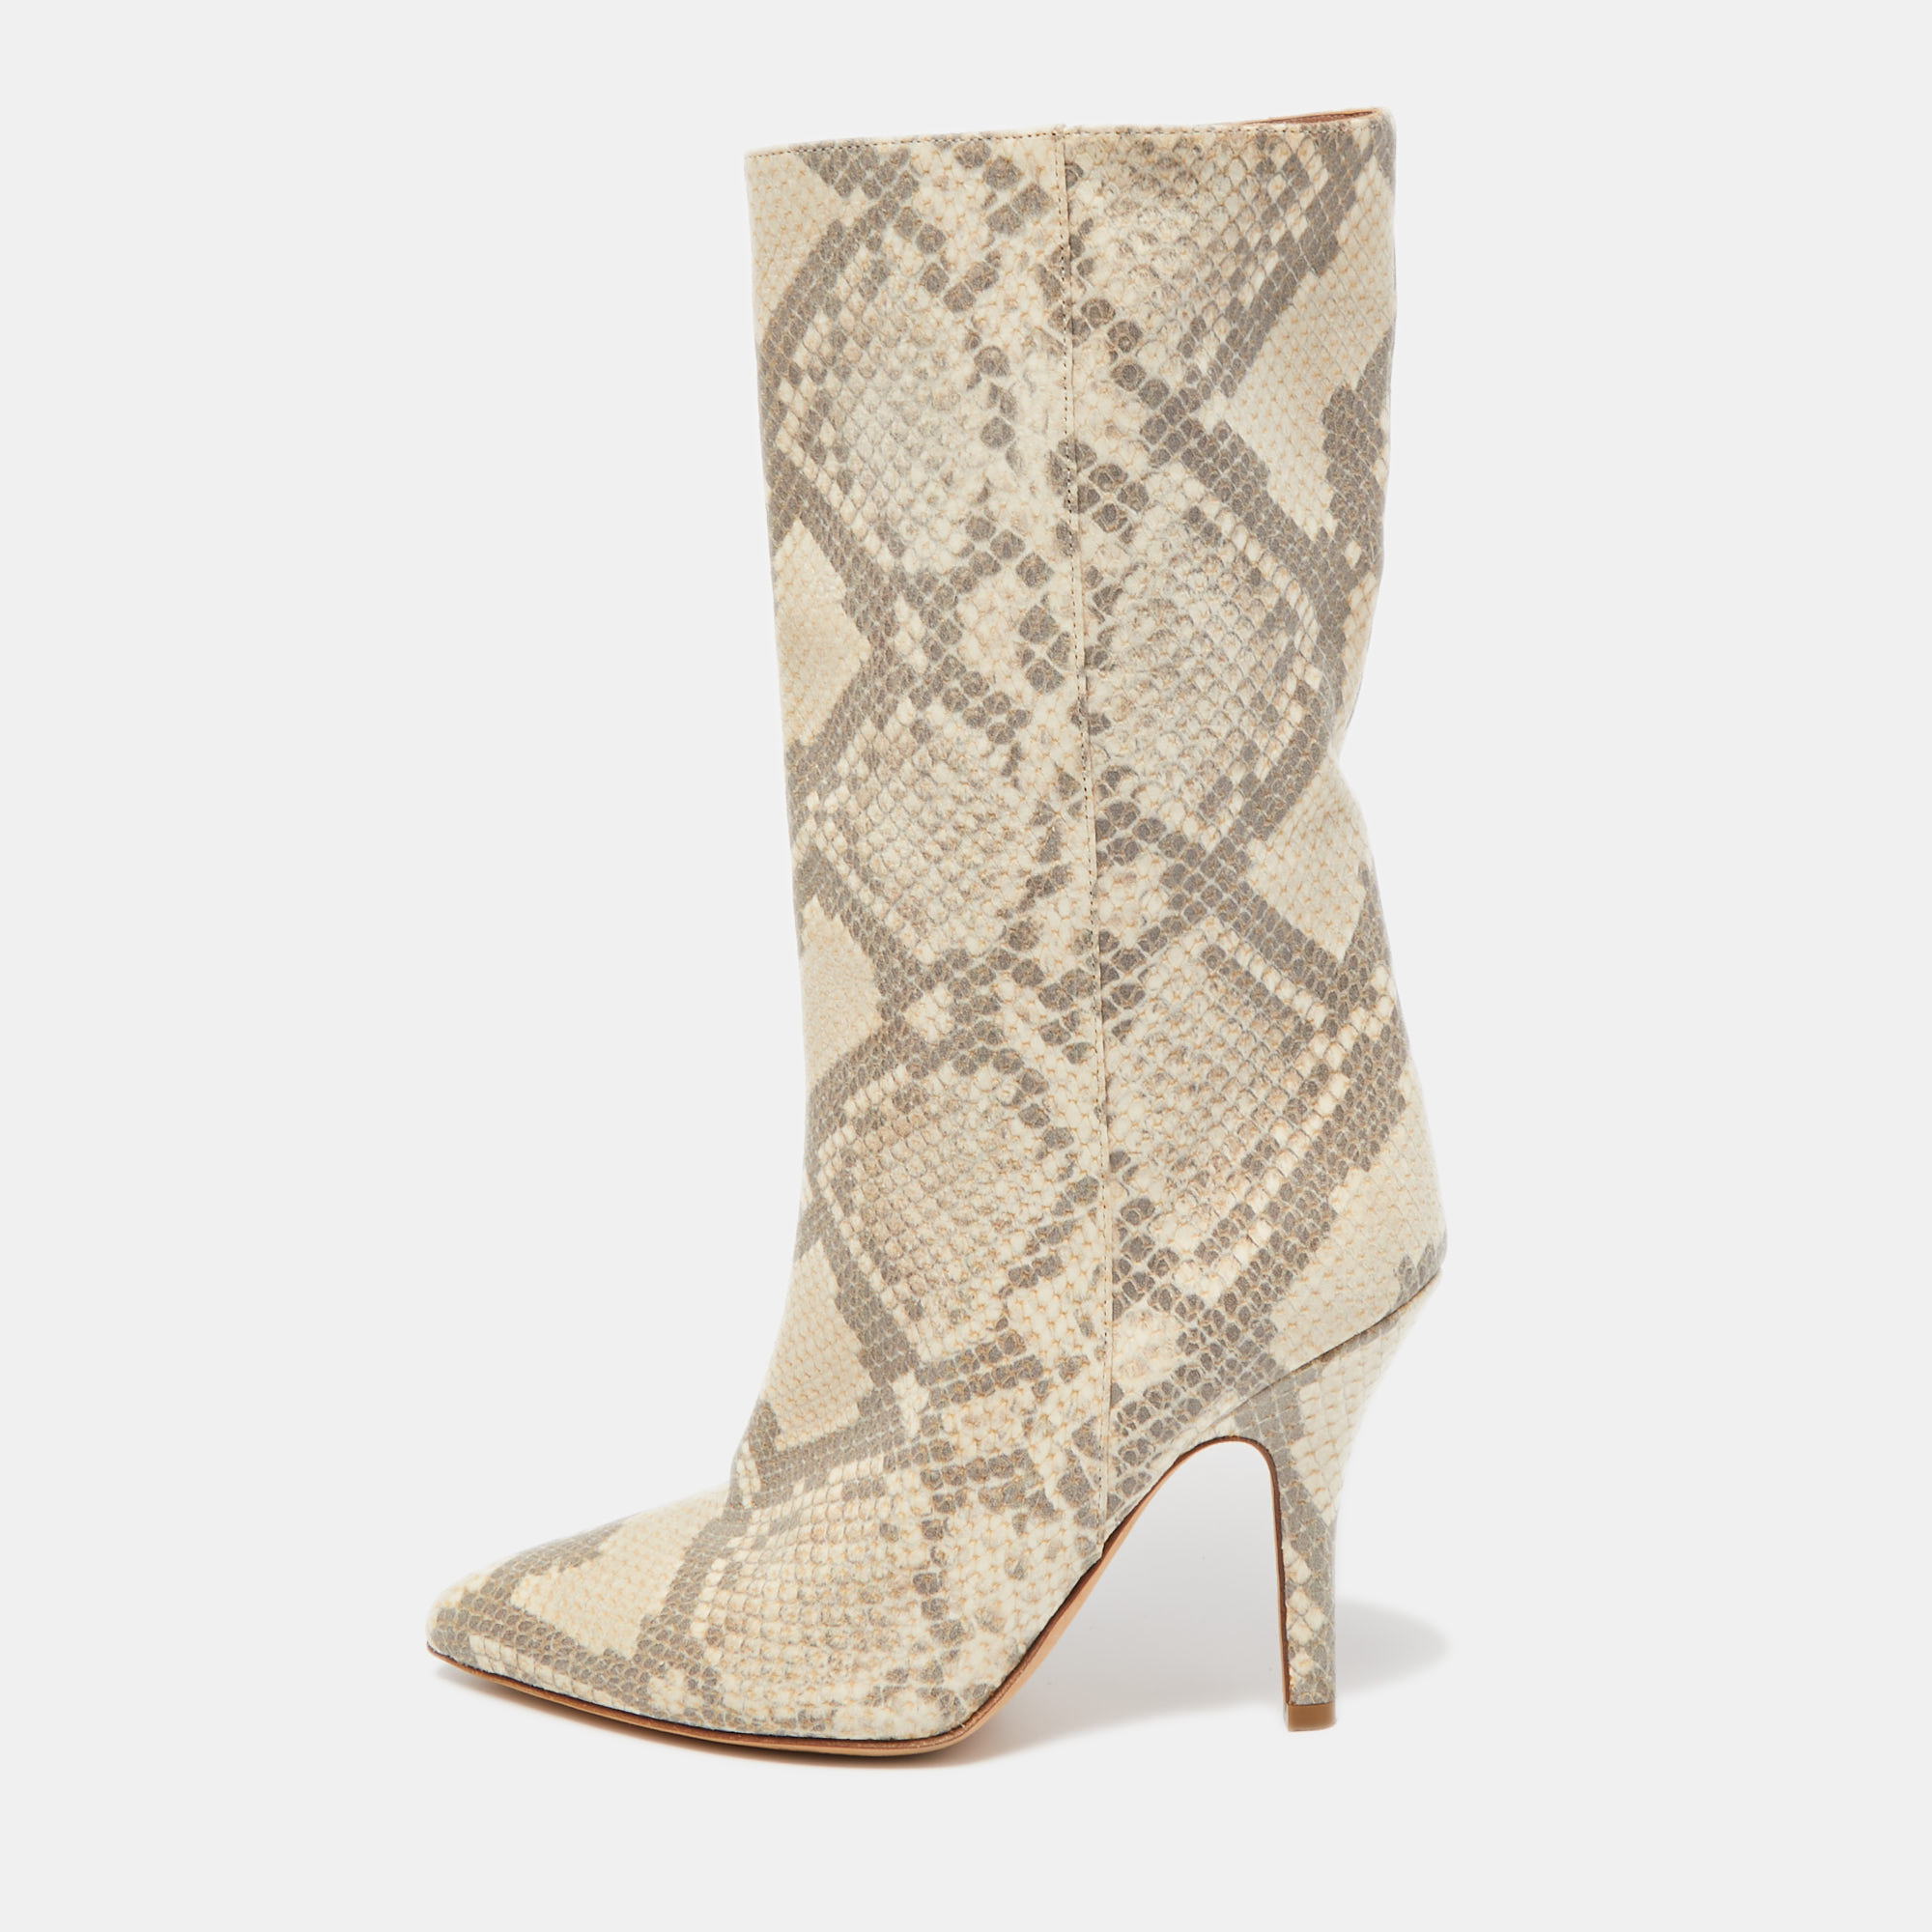 Paris texas beige/brown python embossed leather midcalf boots size 38